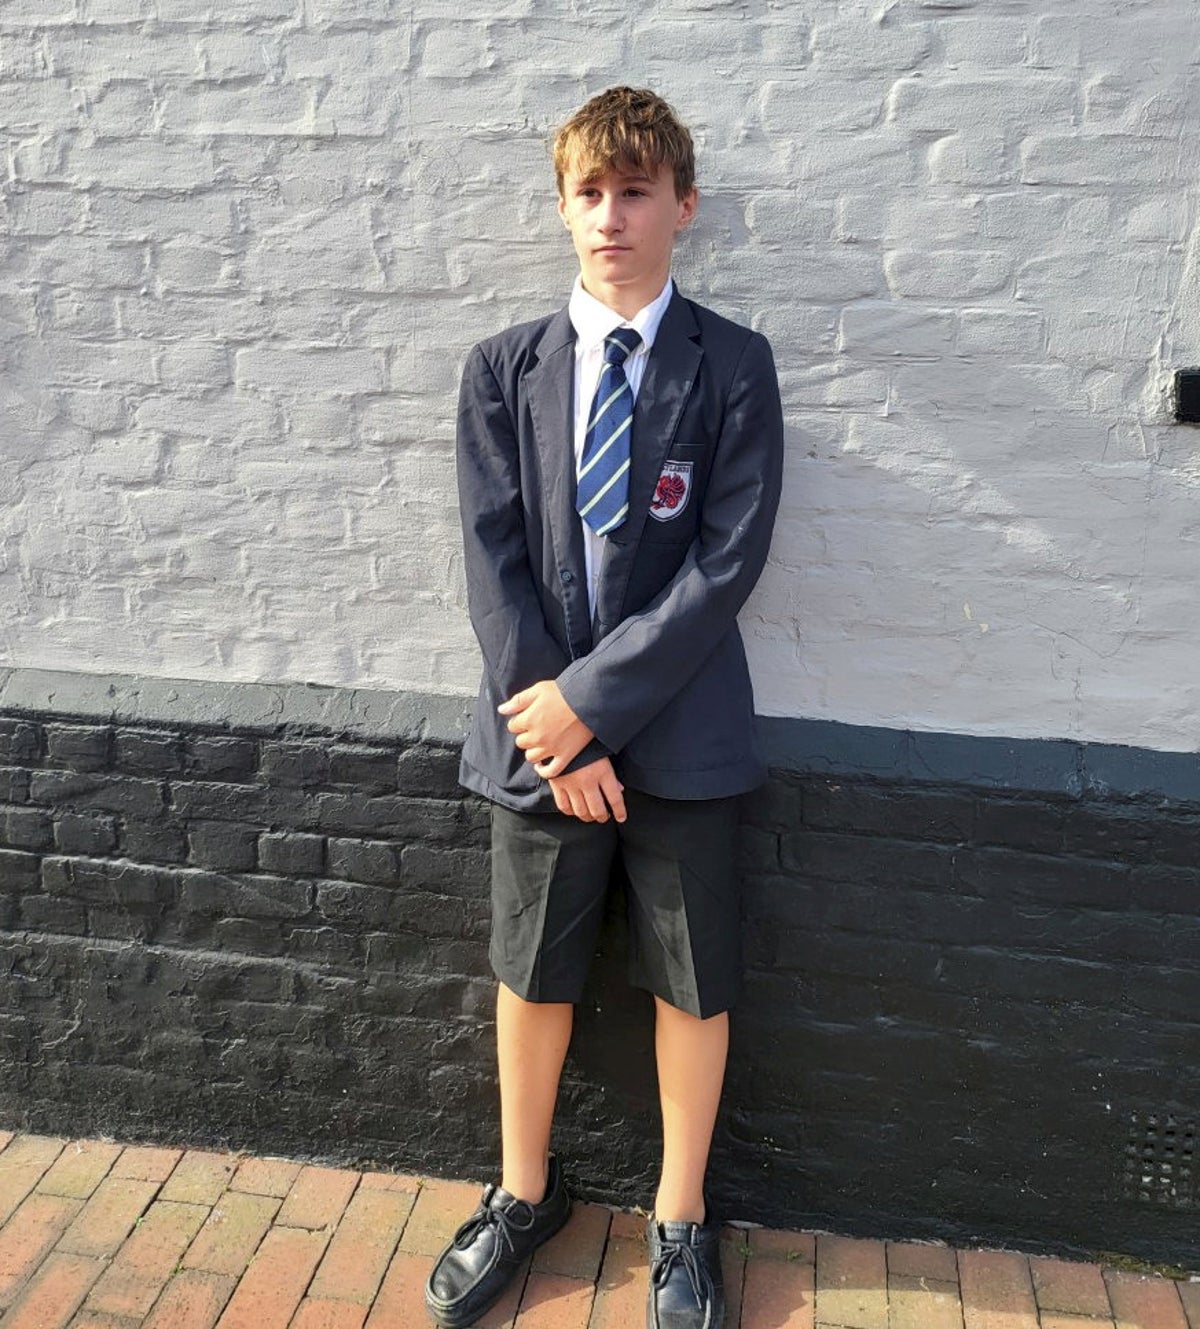 UK heatwave: Schoolboy put in ‘prison-like’ isolation room for wearing shorts as temperatures soared